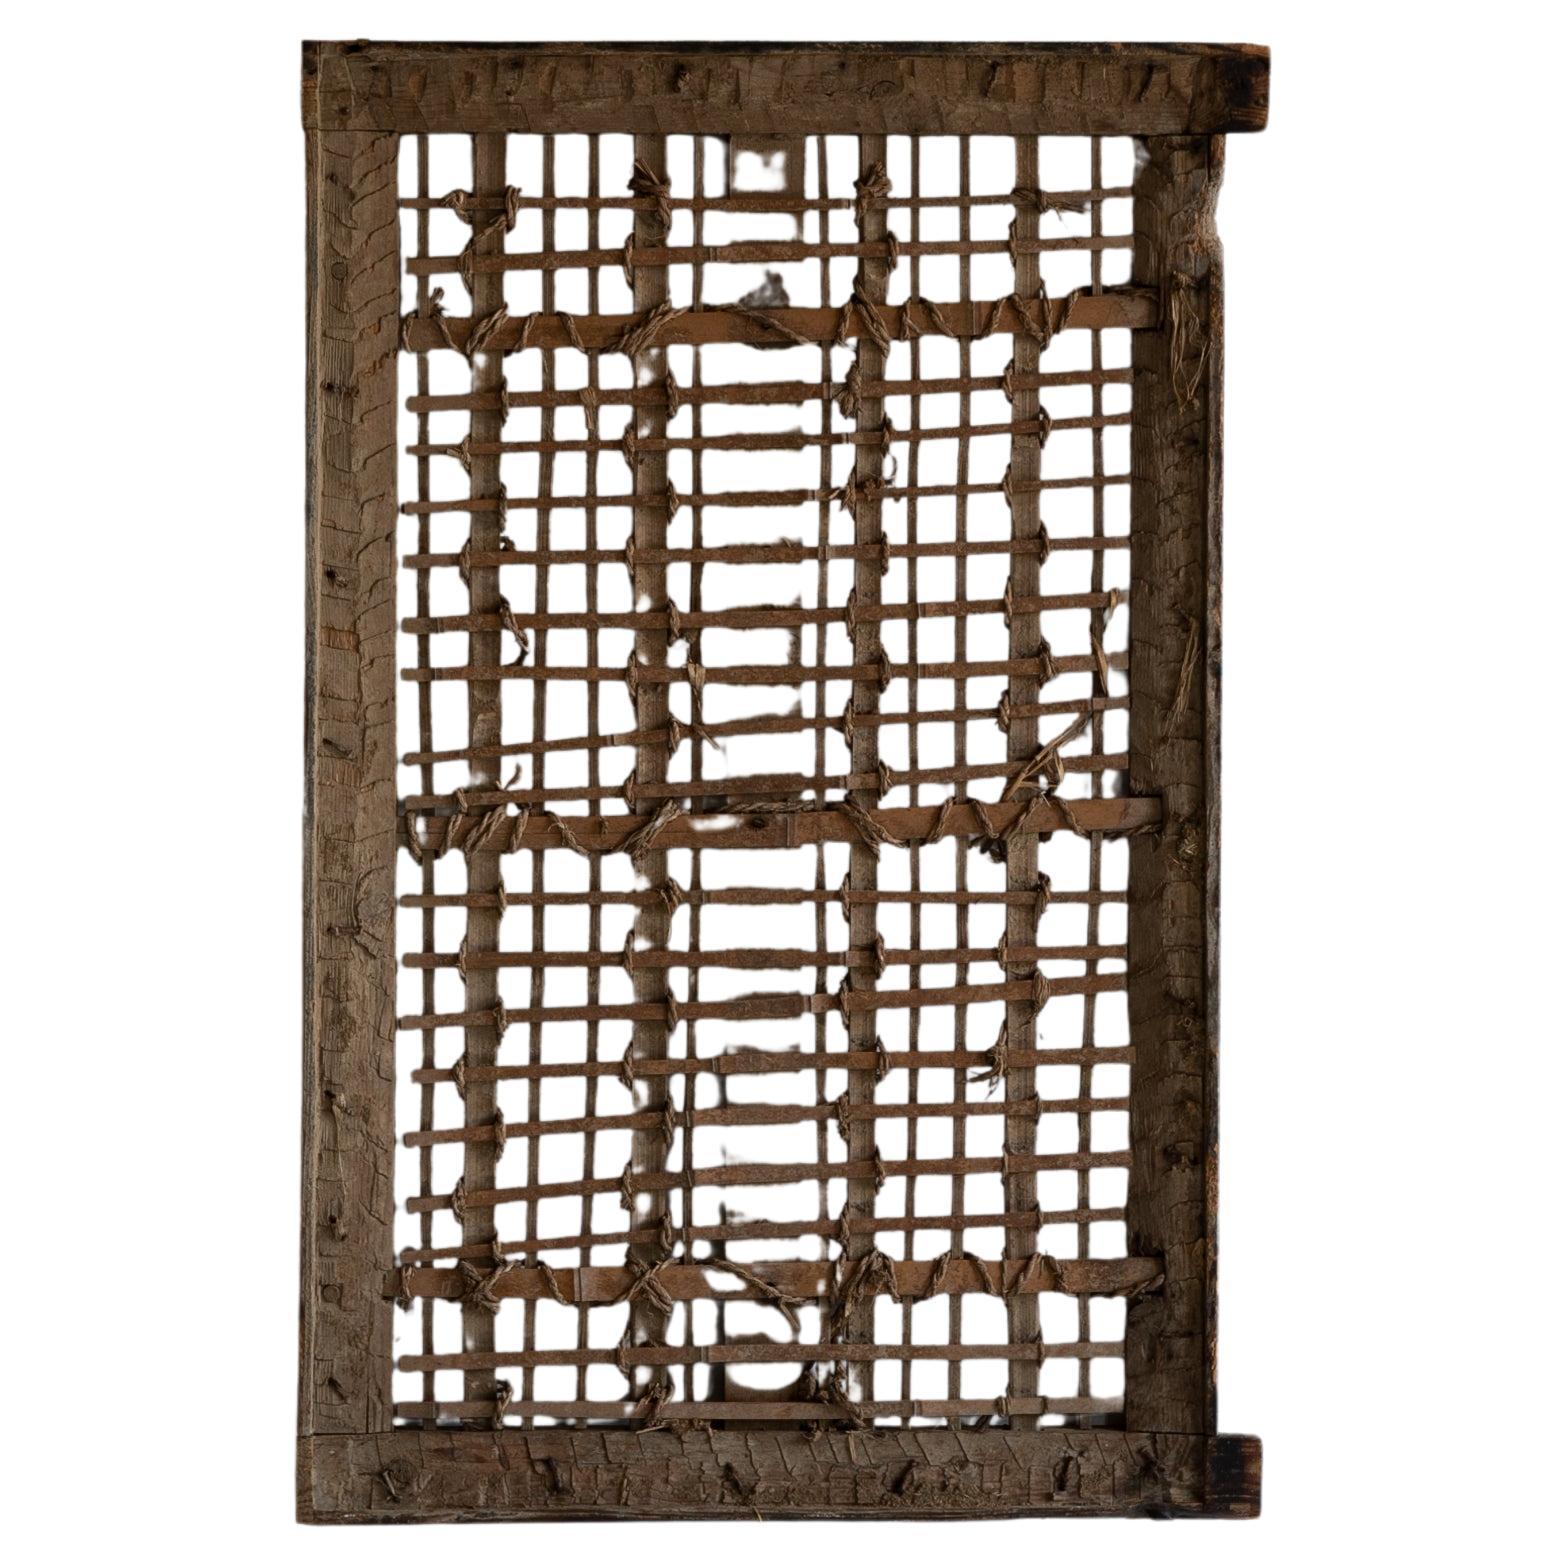 Japanese Antique Door "Wall Decoration" 1860s-1900s / Abstract Art Wabi Sabi For Sale